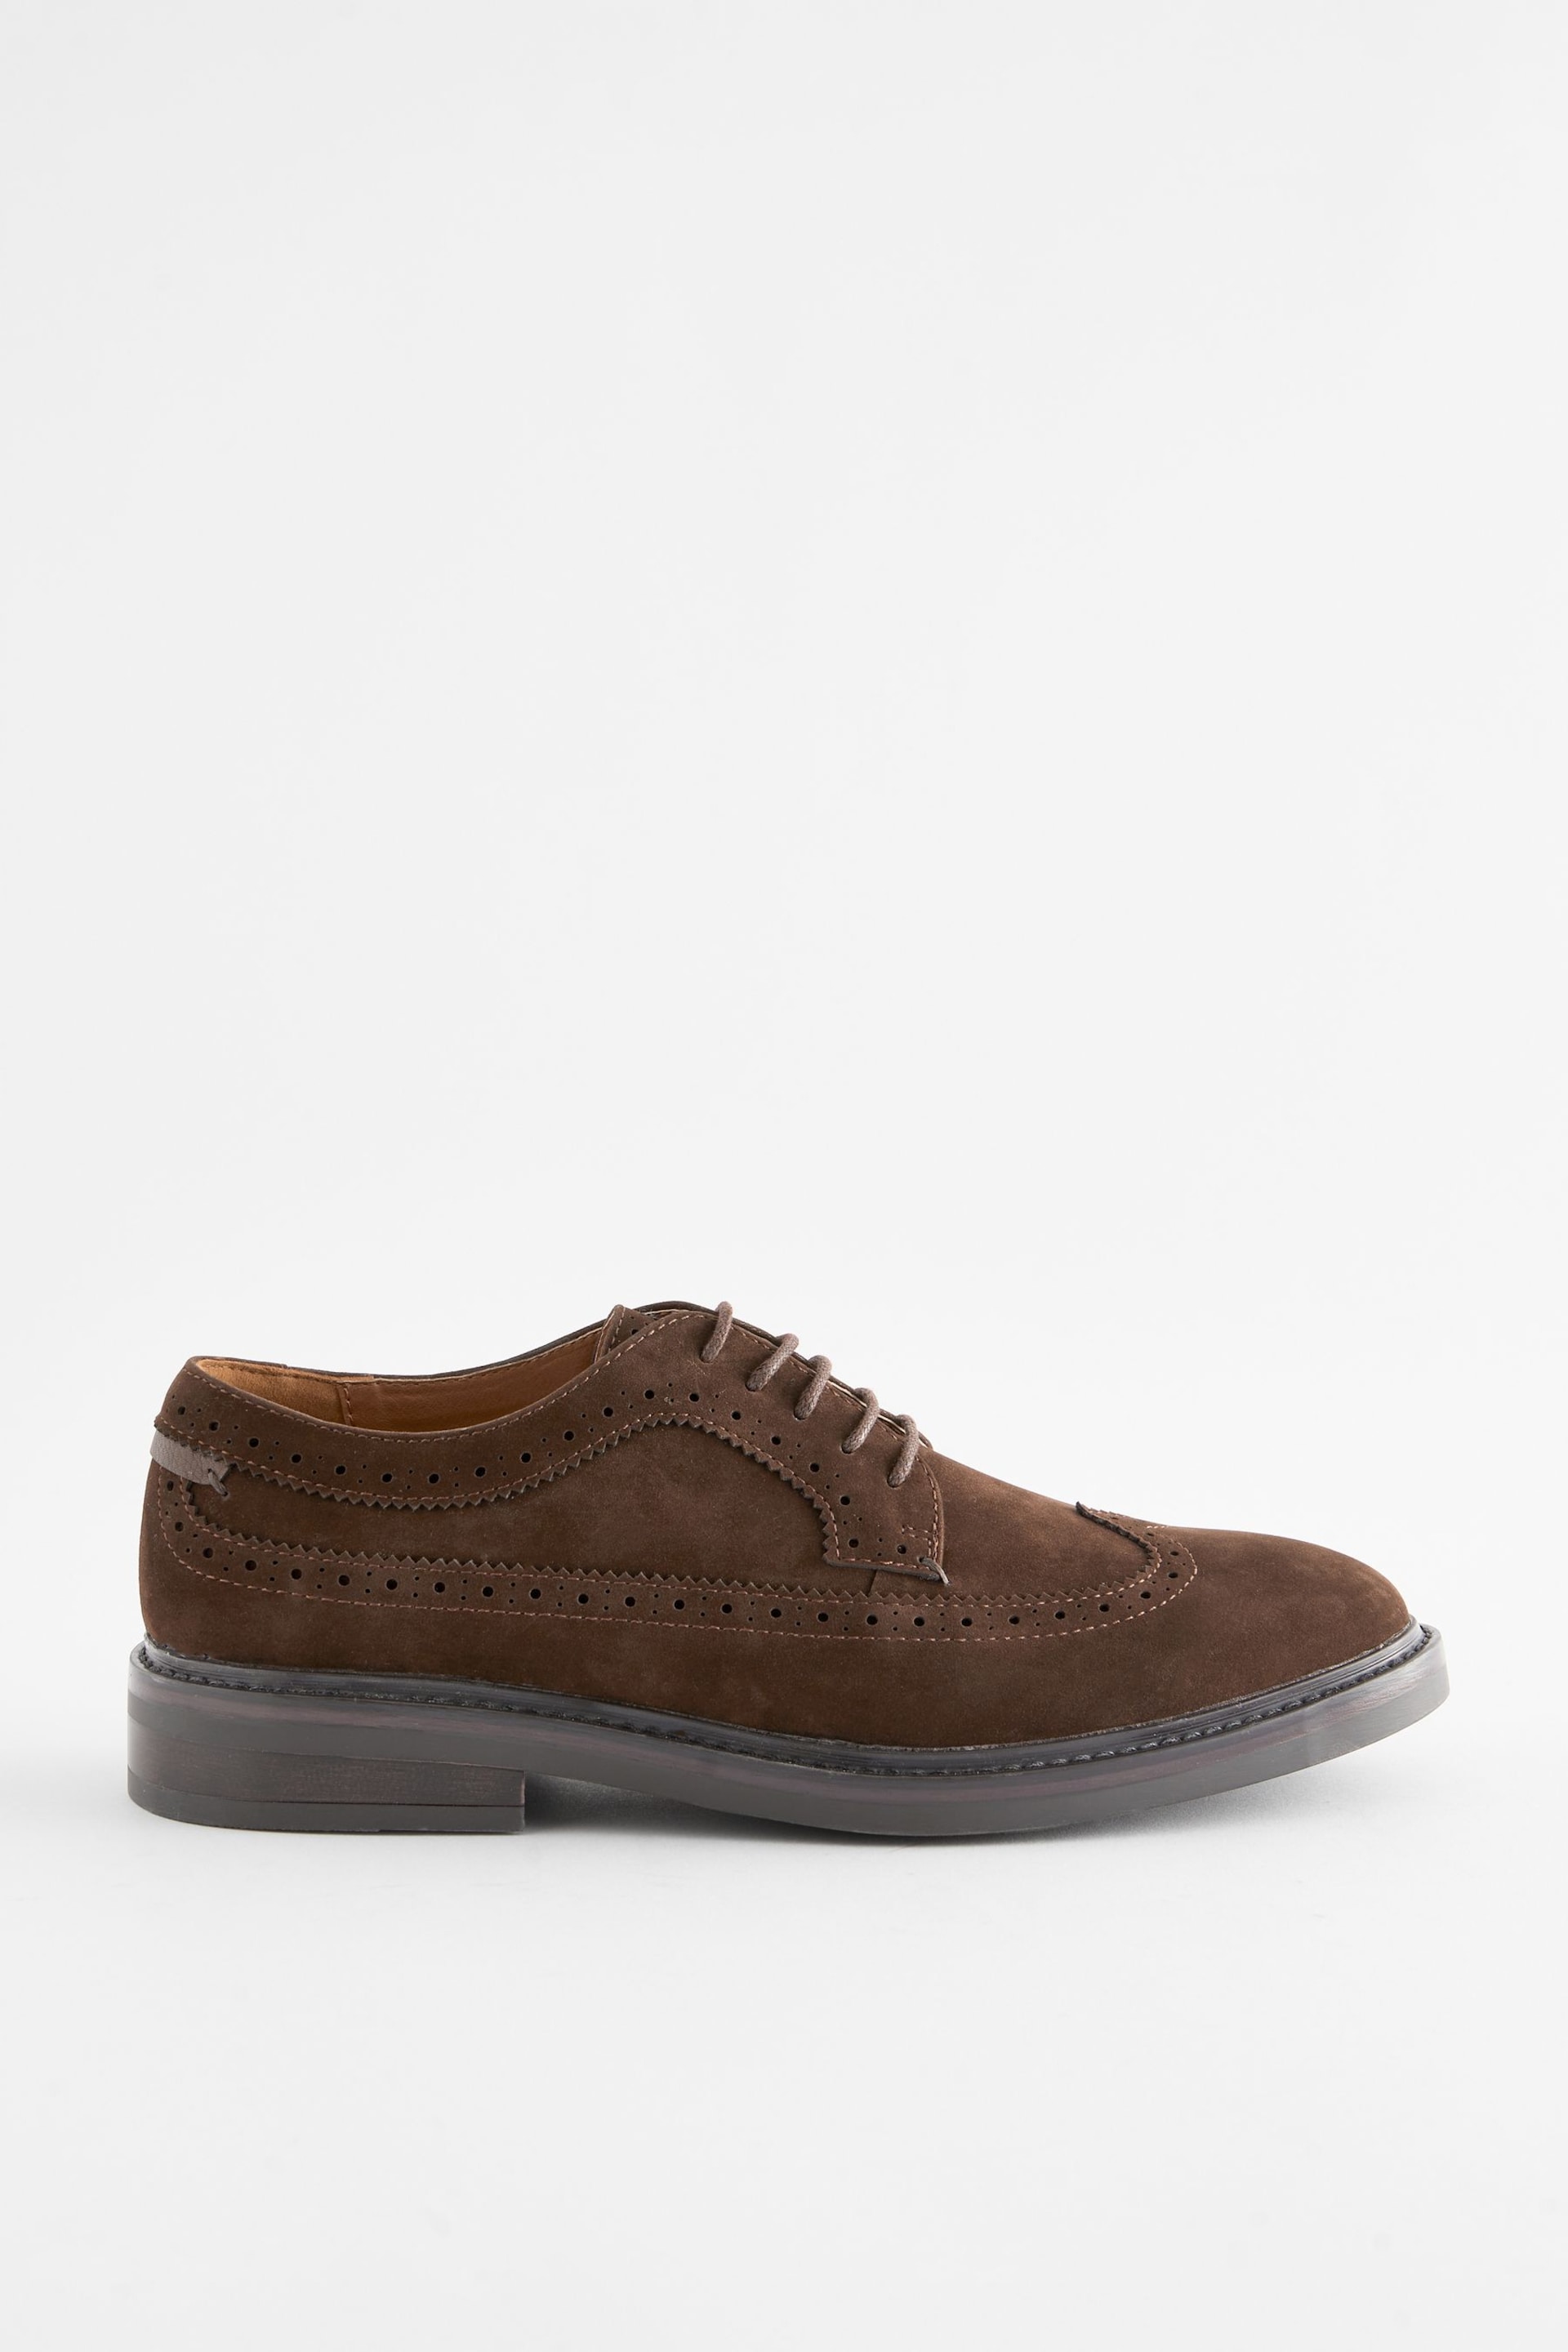 Brown Longwing Brogue Shoes - Image 2 of 5